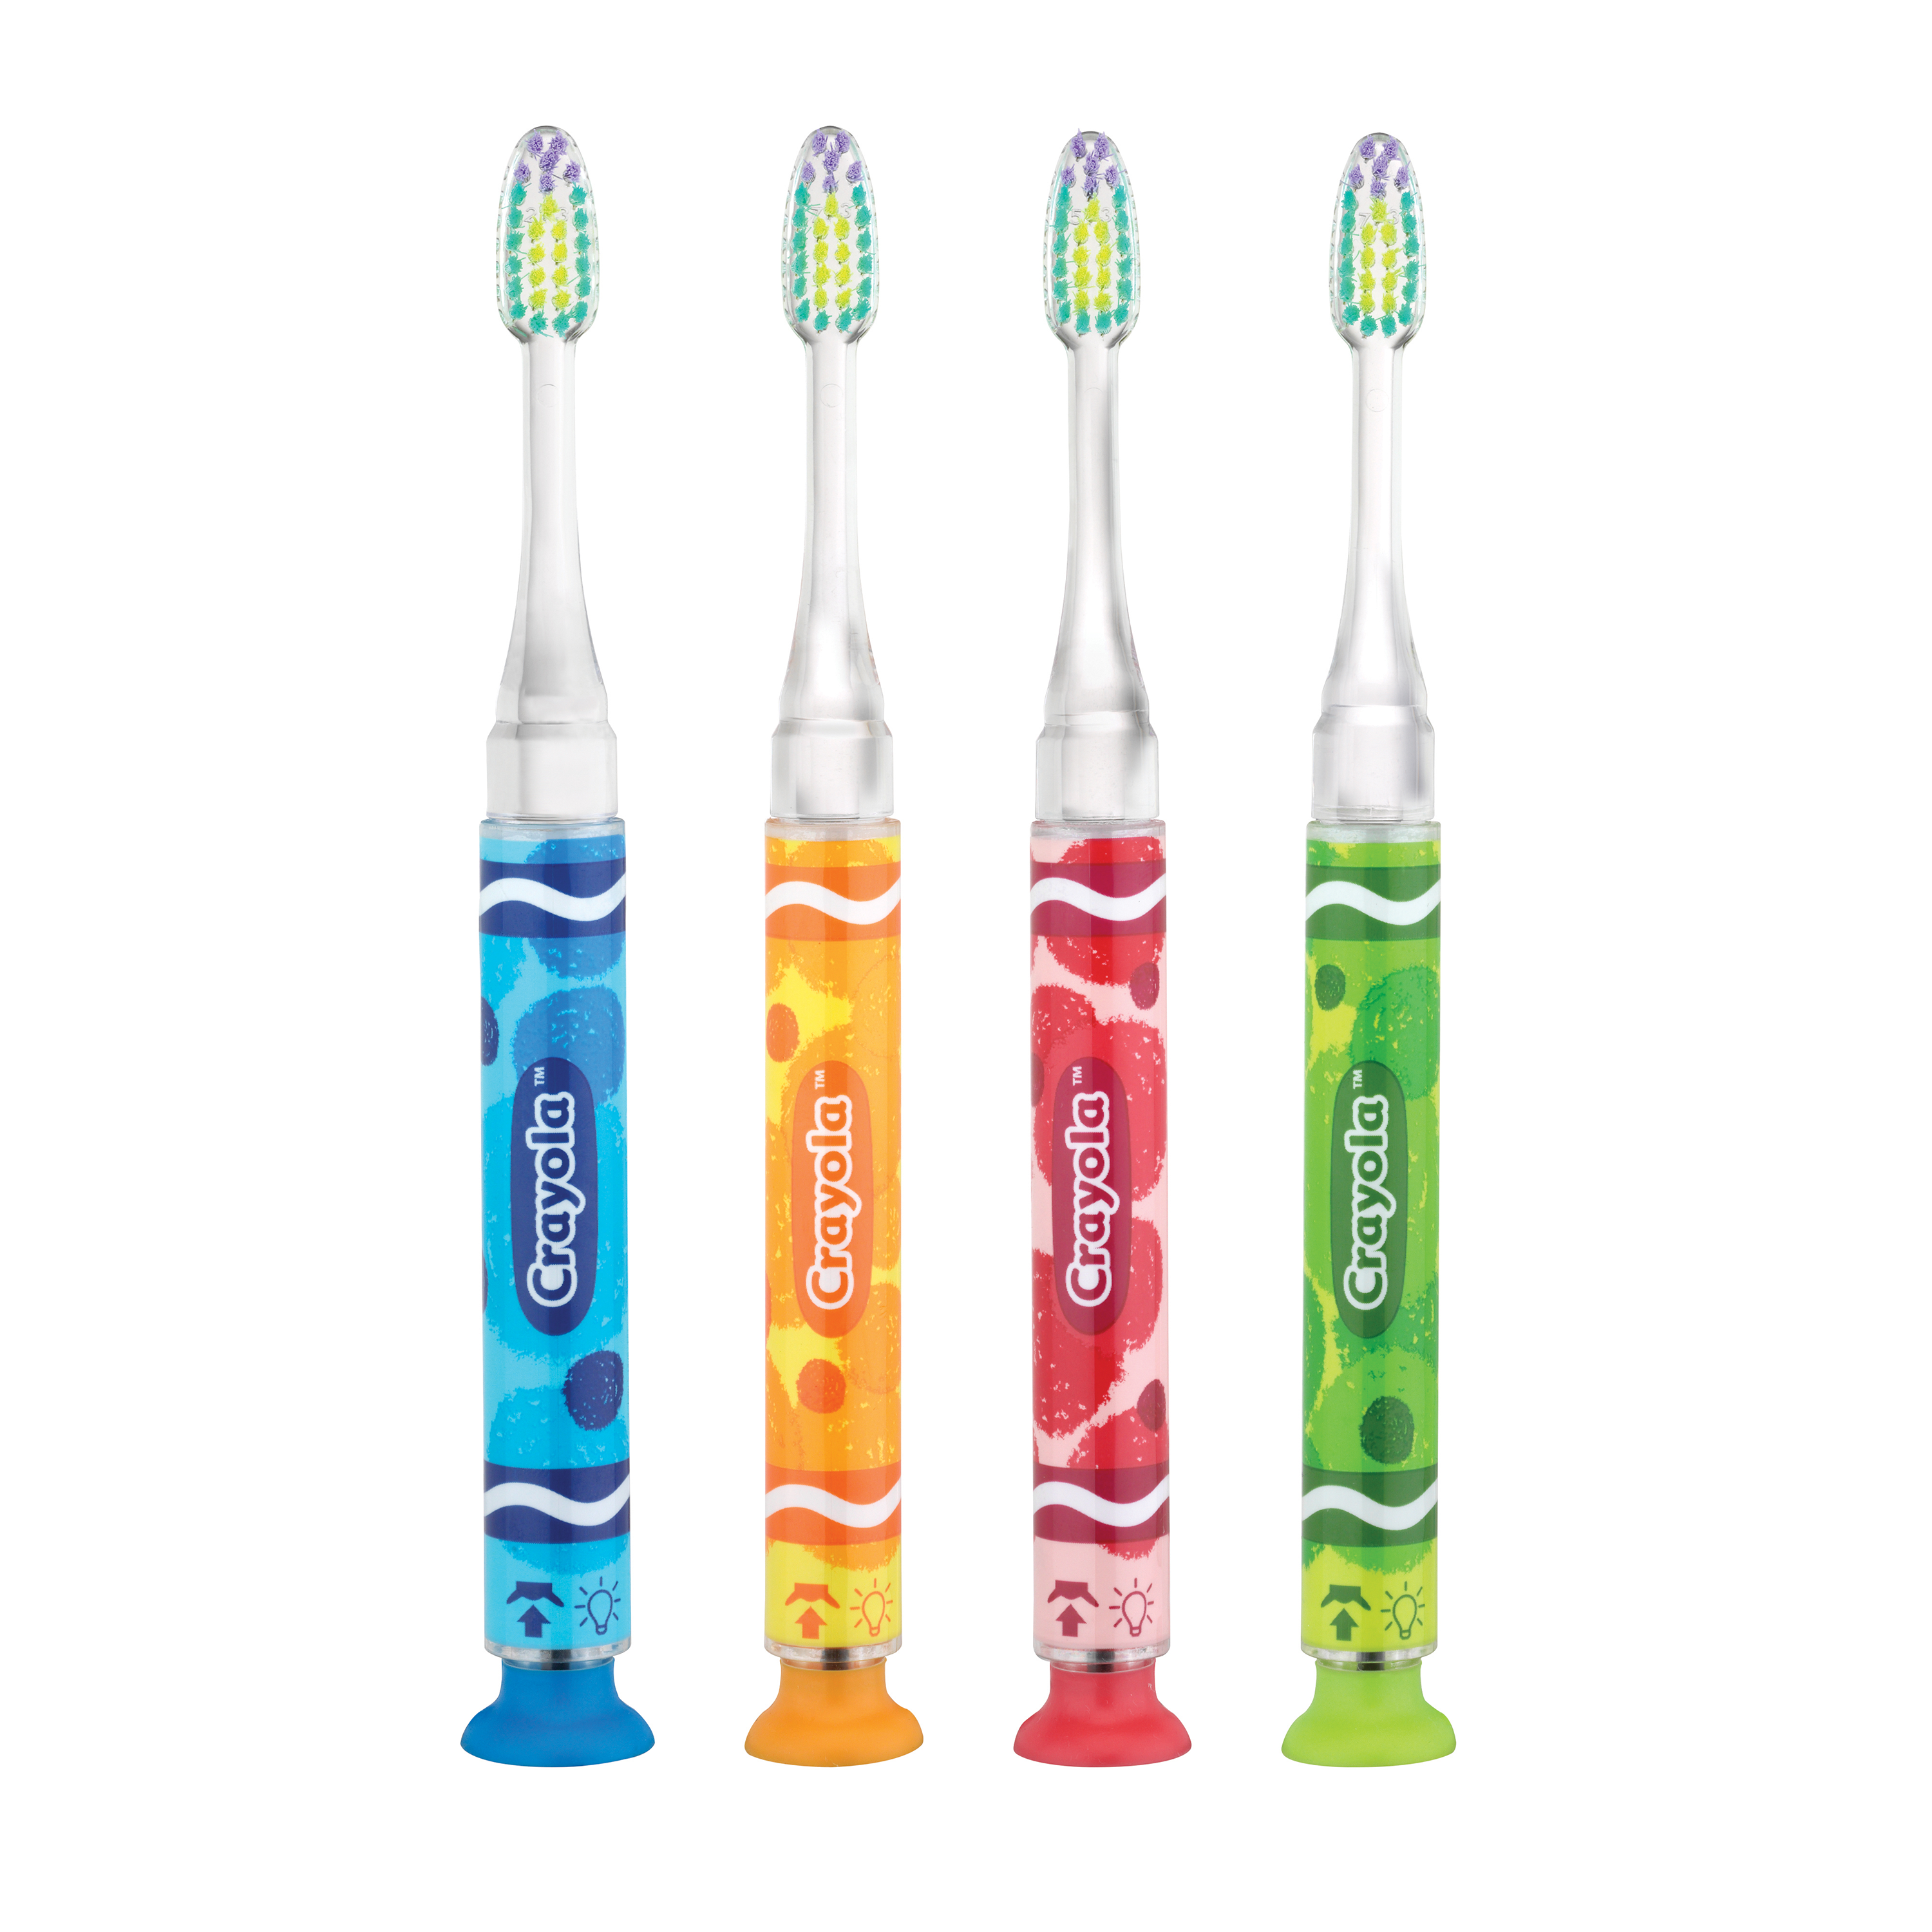 202-Product-Toothbrush-Lightup-Crayola-naked-4colors.png